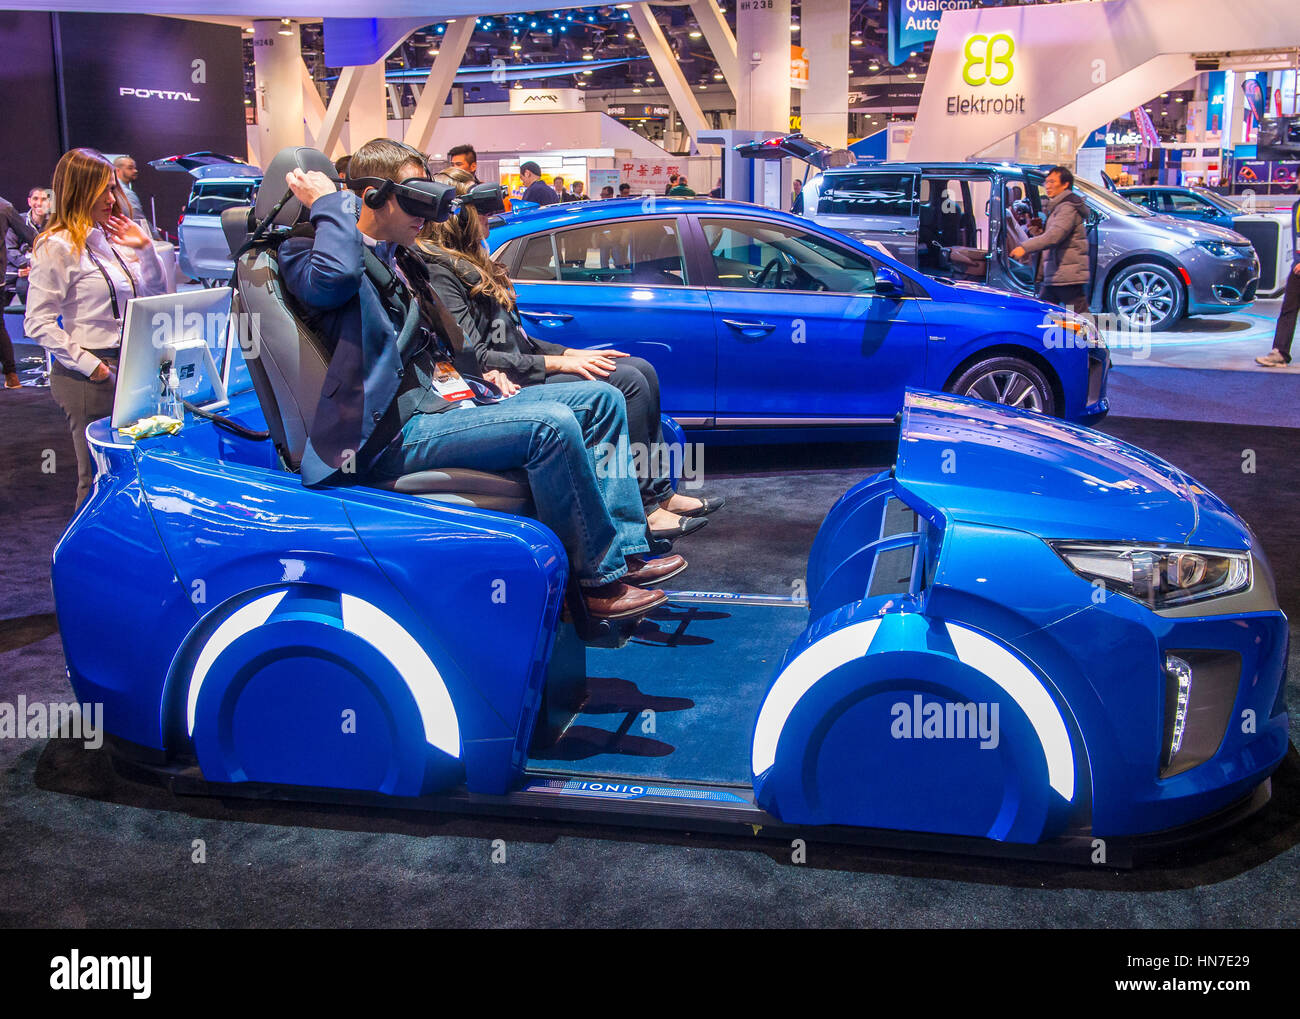 The Hyundai Mobis Concept car simulator at the CES Show in Las Vegas. CES is the world's leading consumer-electronics show. Stock Photo